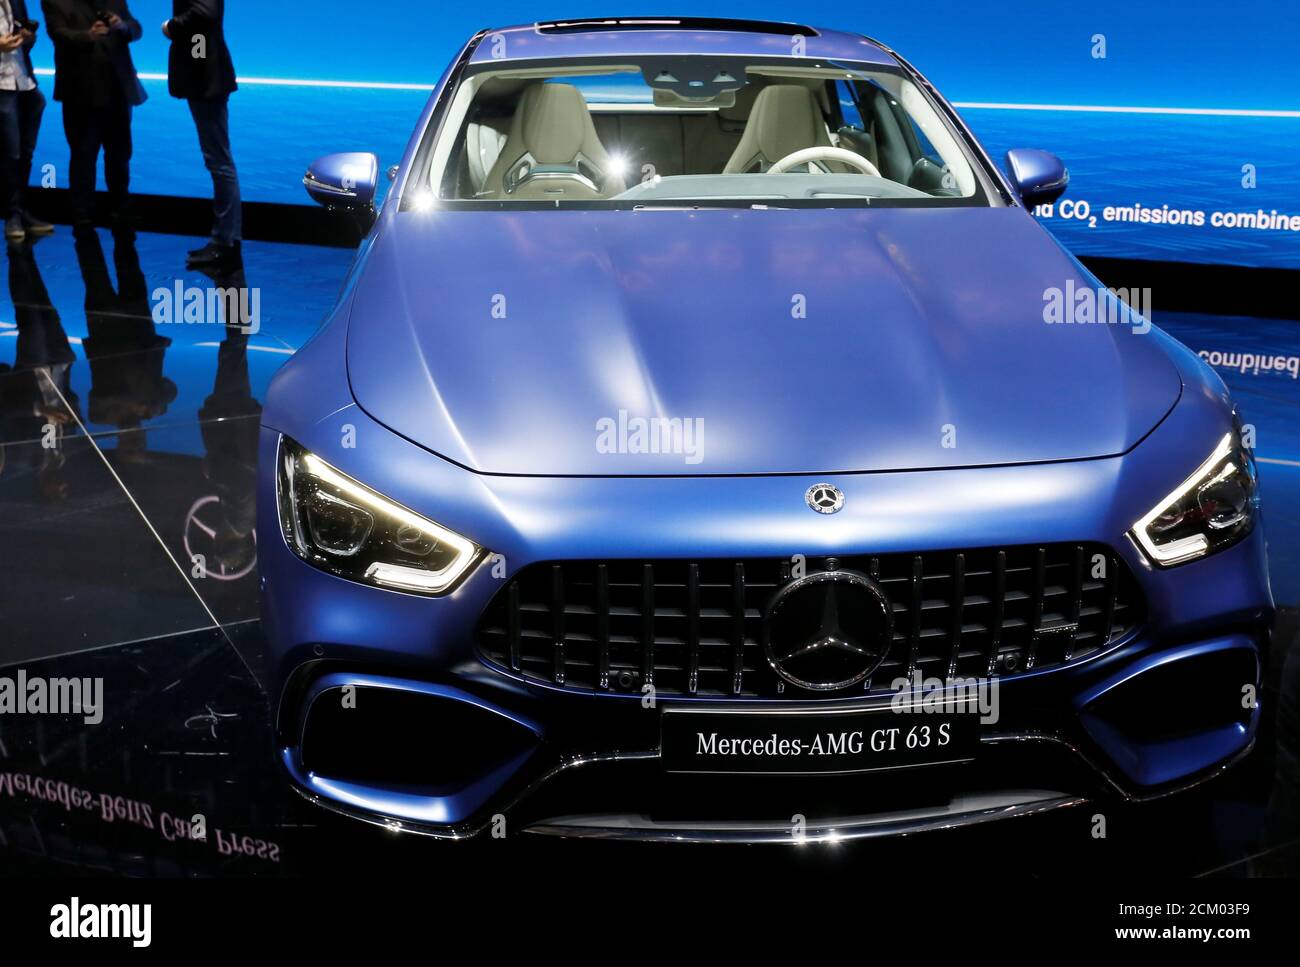 The Mercedes-AMG GT 63 S is seen during a presentation at the 88th  International Motor Show at Palexpo in Geneva, Switzerland, March 6, 2018.  REUTERS/Pierre Albouy Stock Photo - Alamy